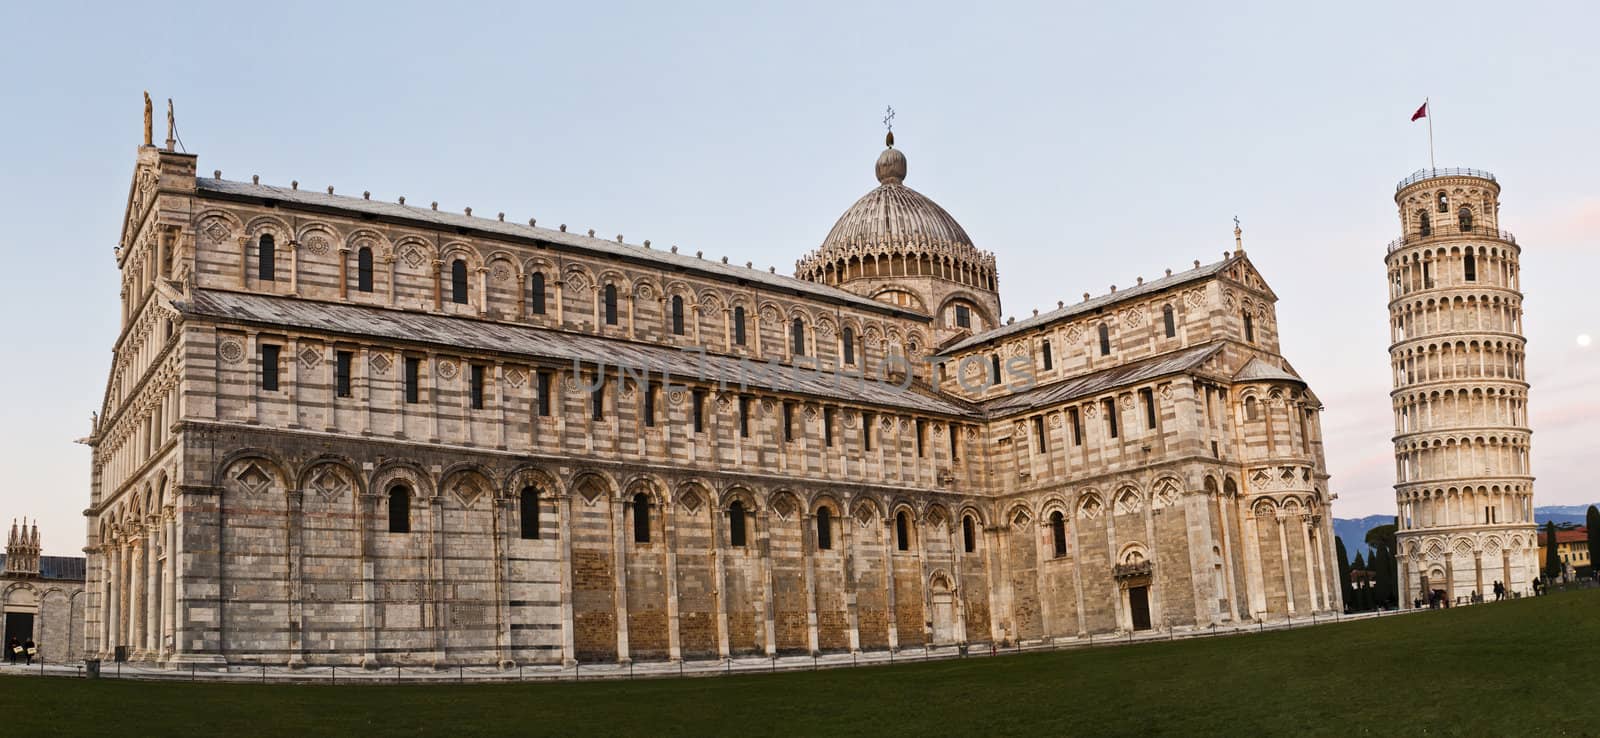 Pisa, Piazza dei miracoli, with the Basilica and the leaning tower.